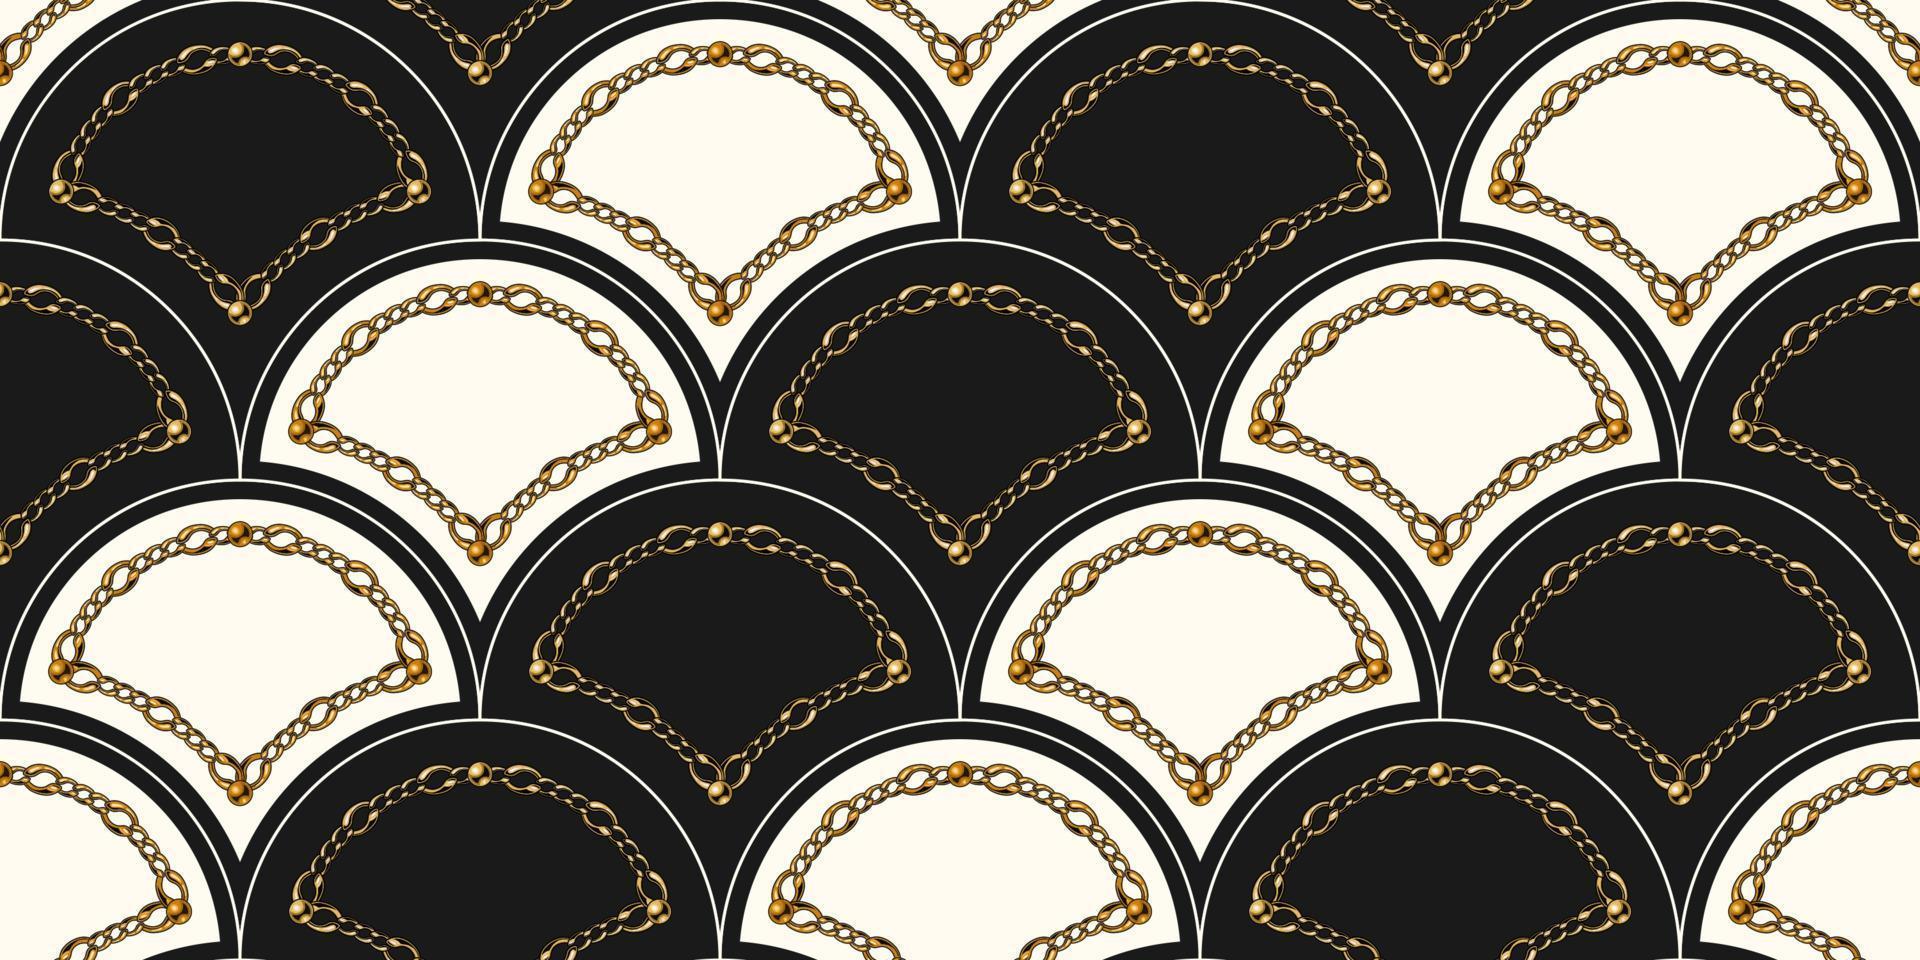 Shell shaped grid seamless pattern with gold chain and beads on black background. Fashion illustration. Seamless art deco pattern. Vector